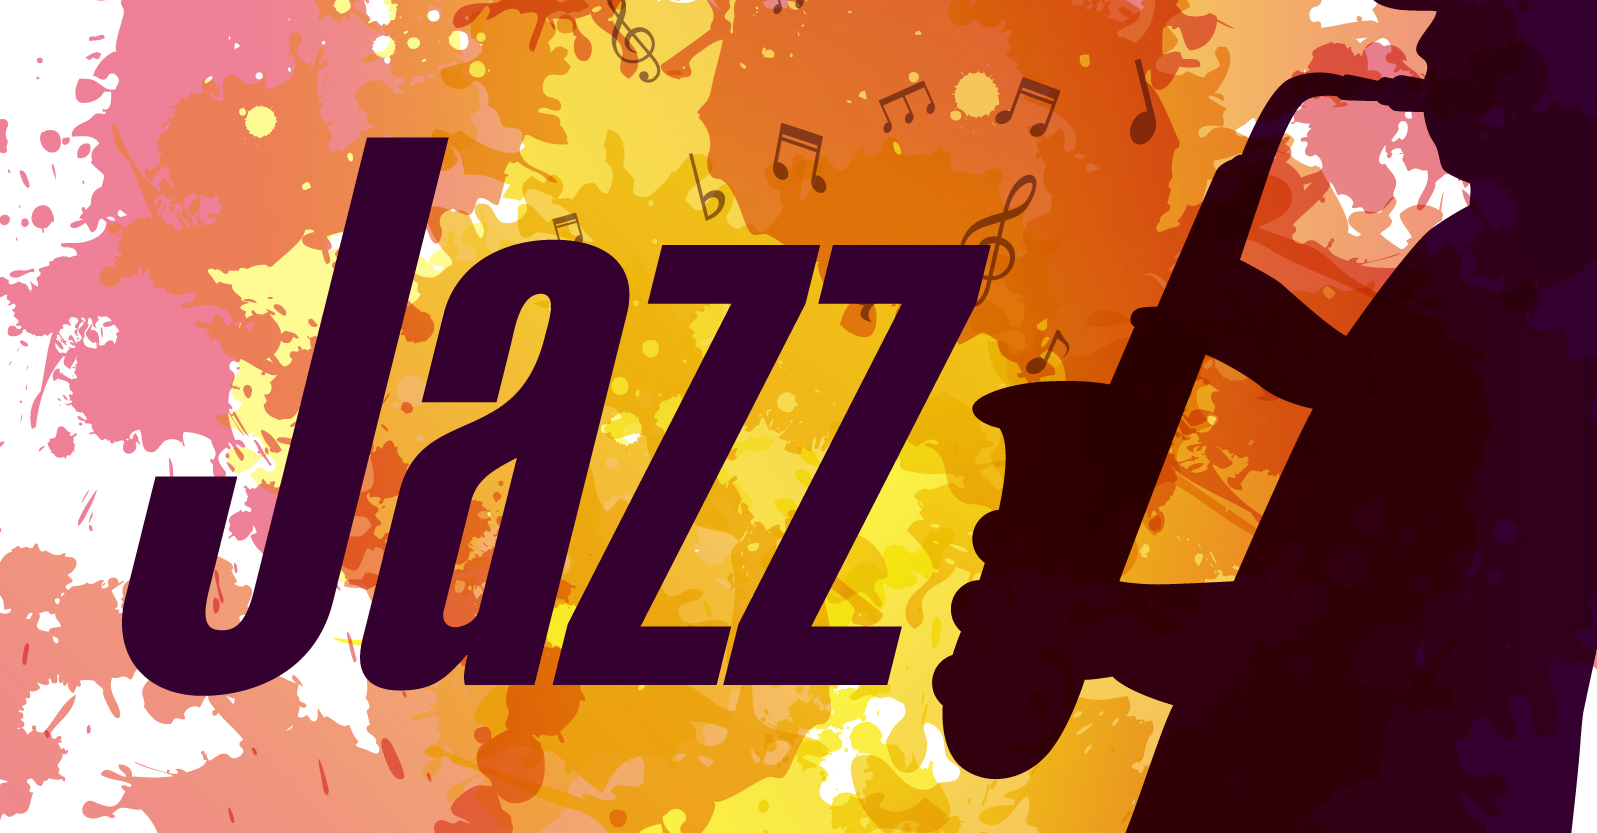 Jazz Music - Free Mp3 Downlaods, Music Charts, Songs, Biography